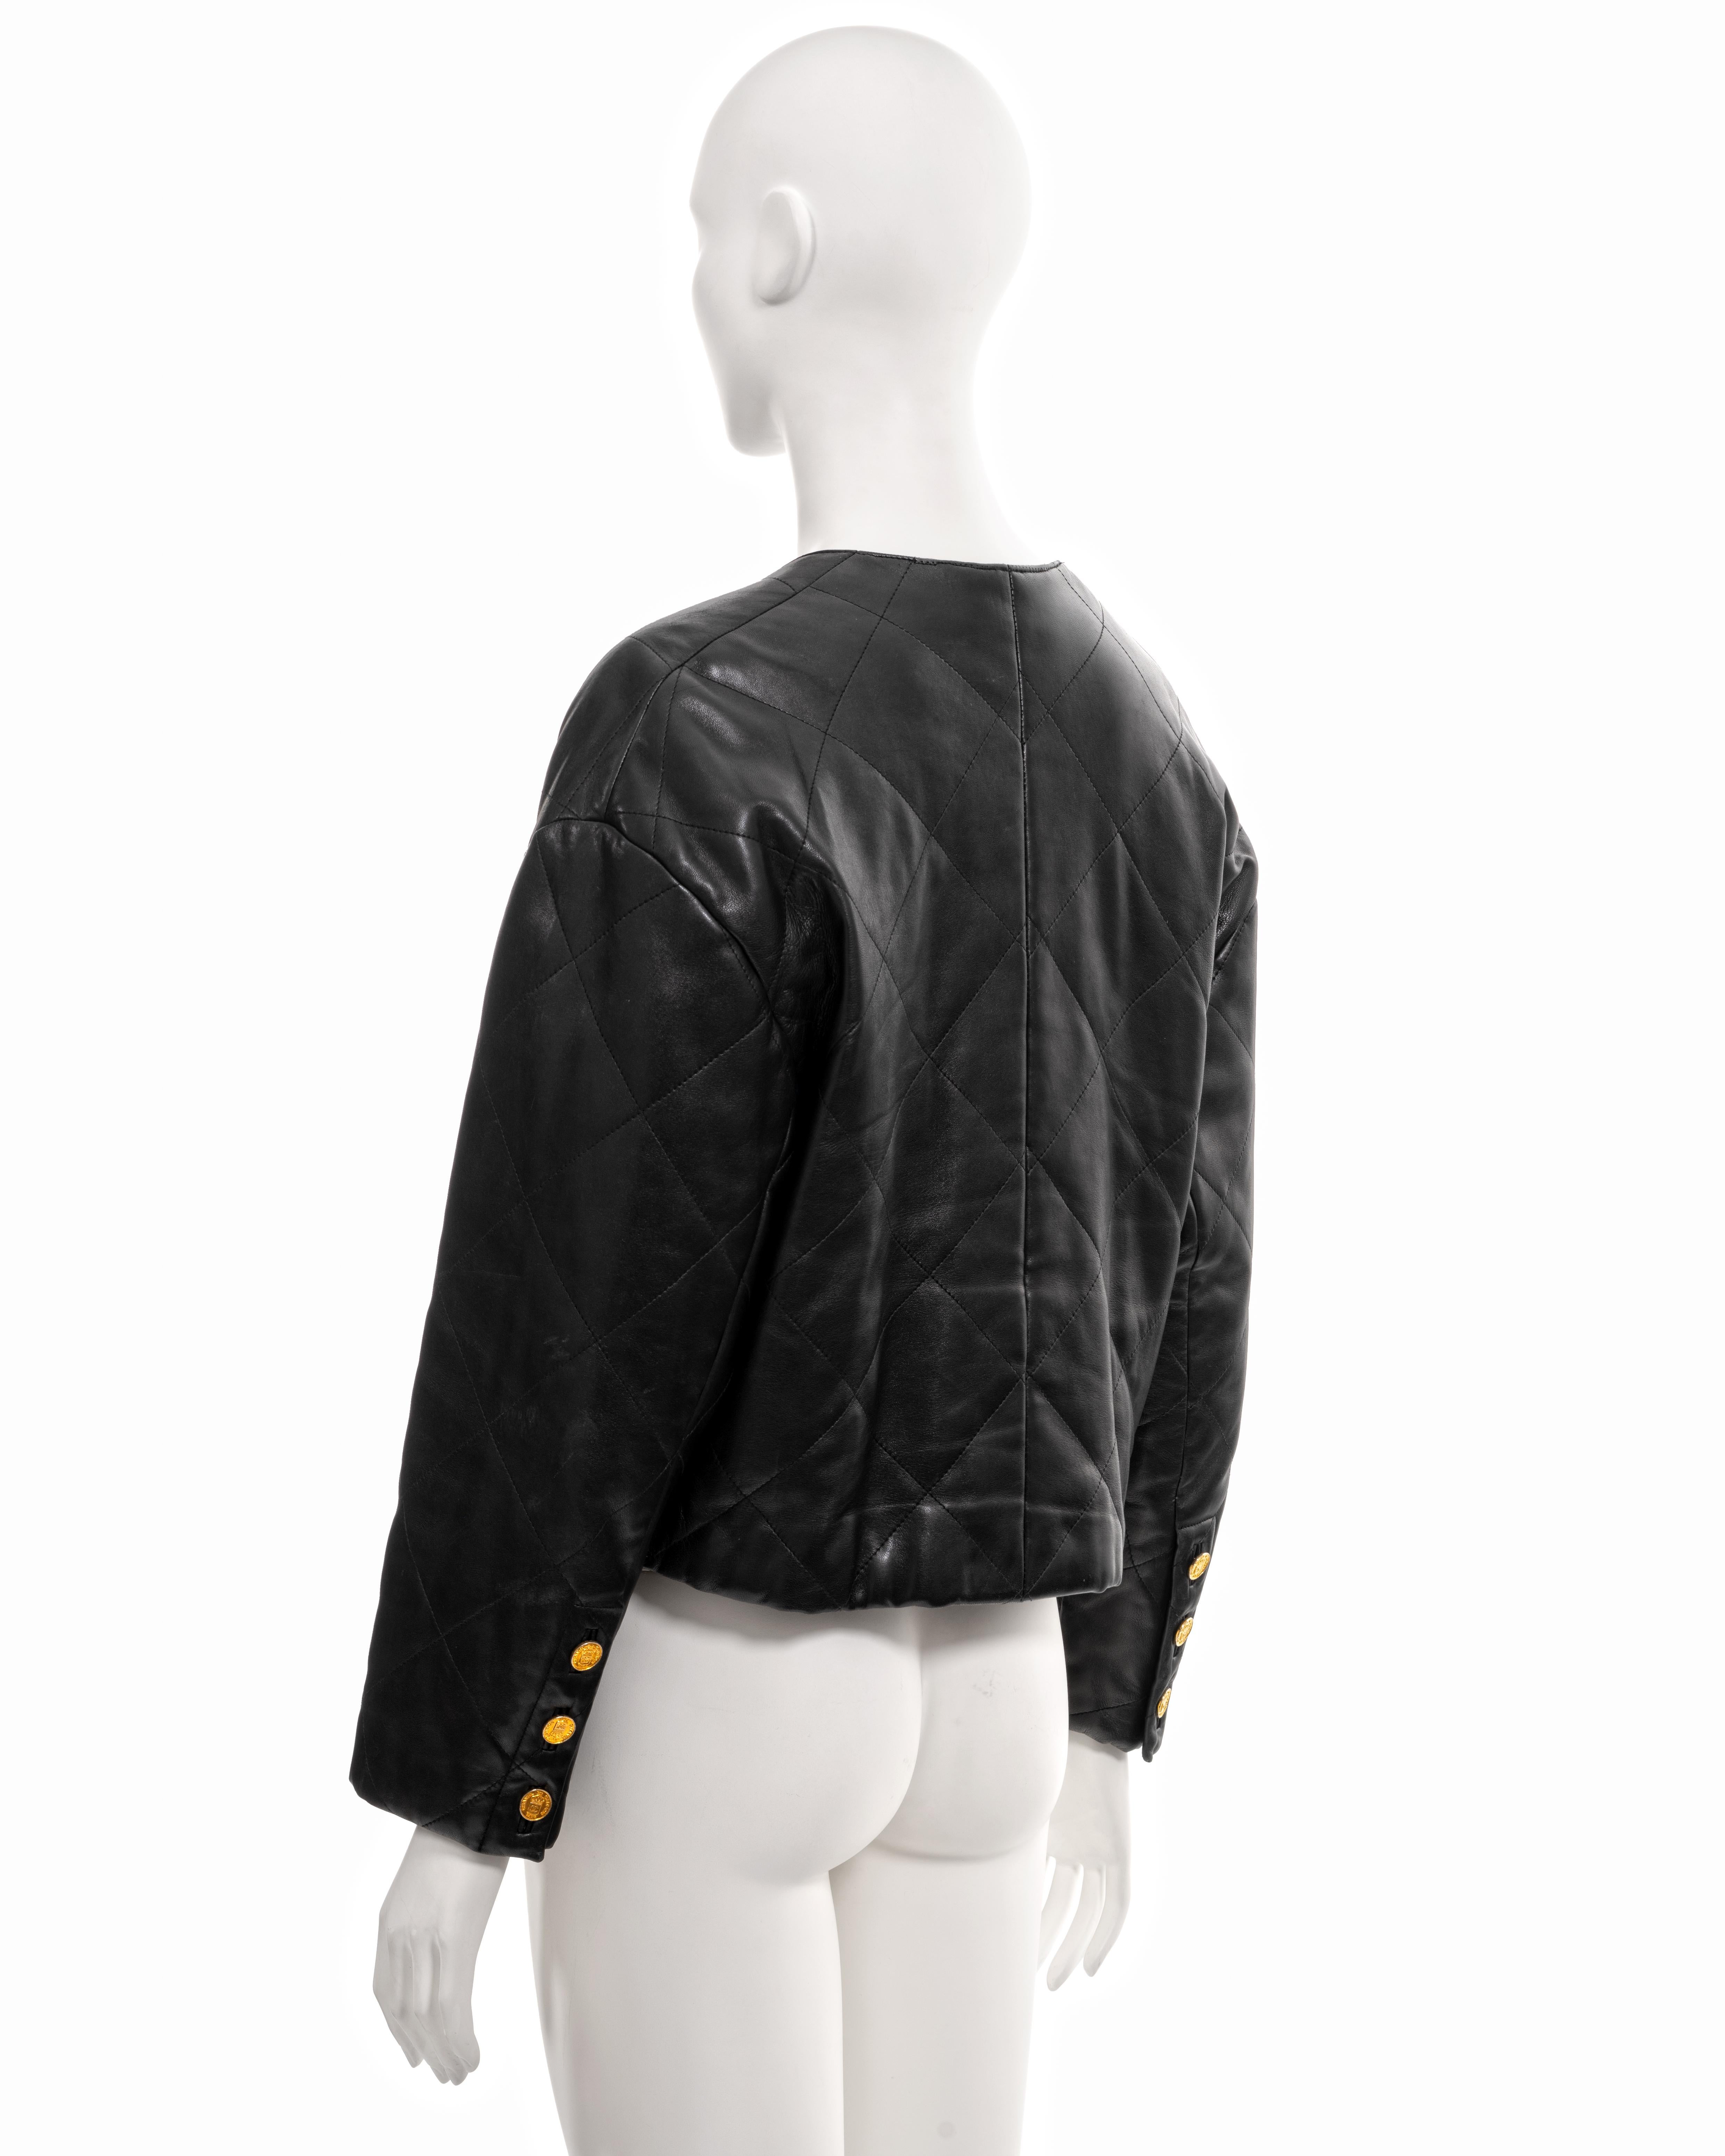 Chanel by Karl Lagerfeld black quilted lambskin leather jacket, fw 1987 5